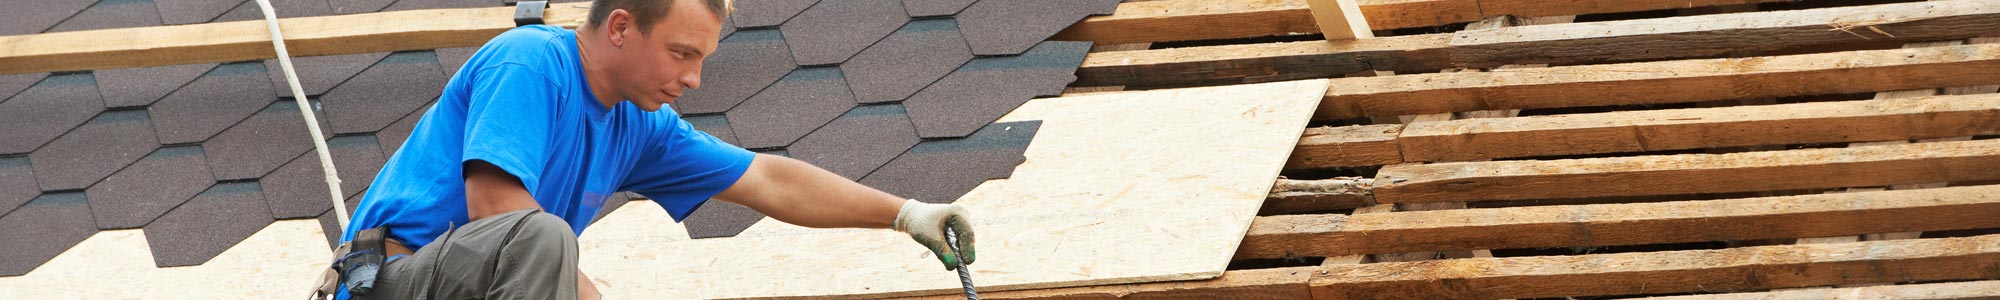 Complete Tear Off and Re-Roofing Services